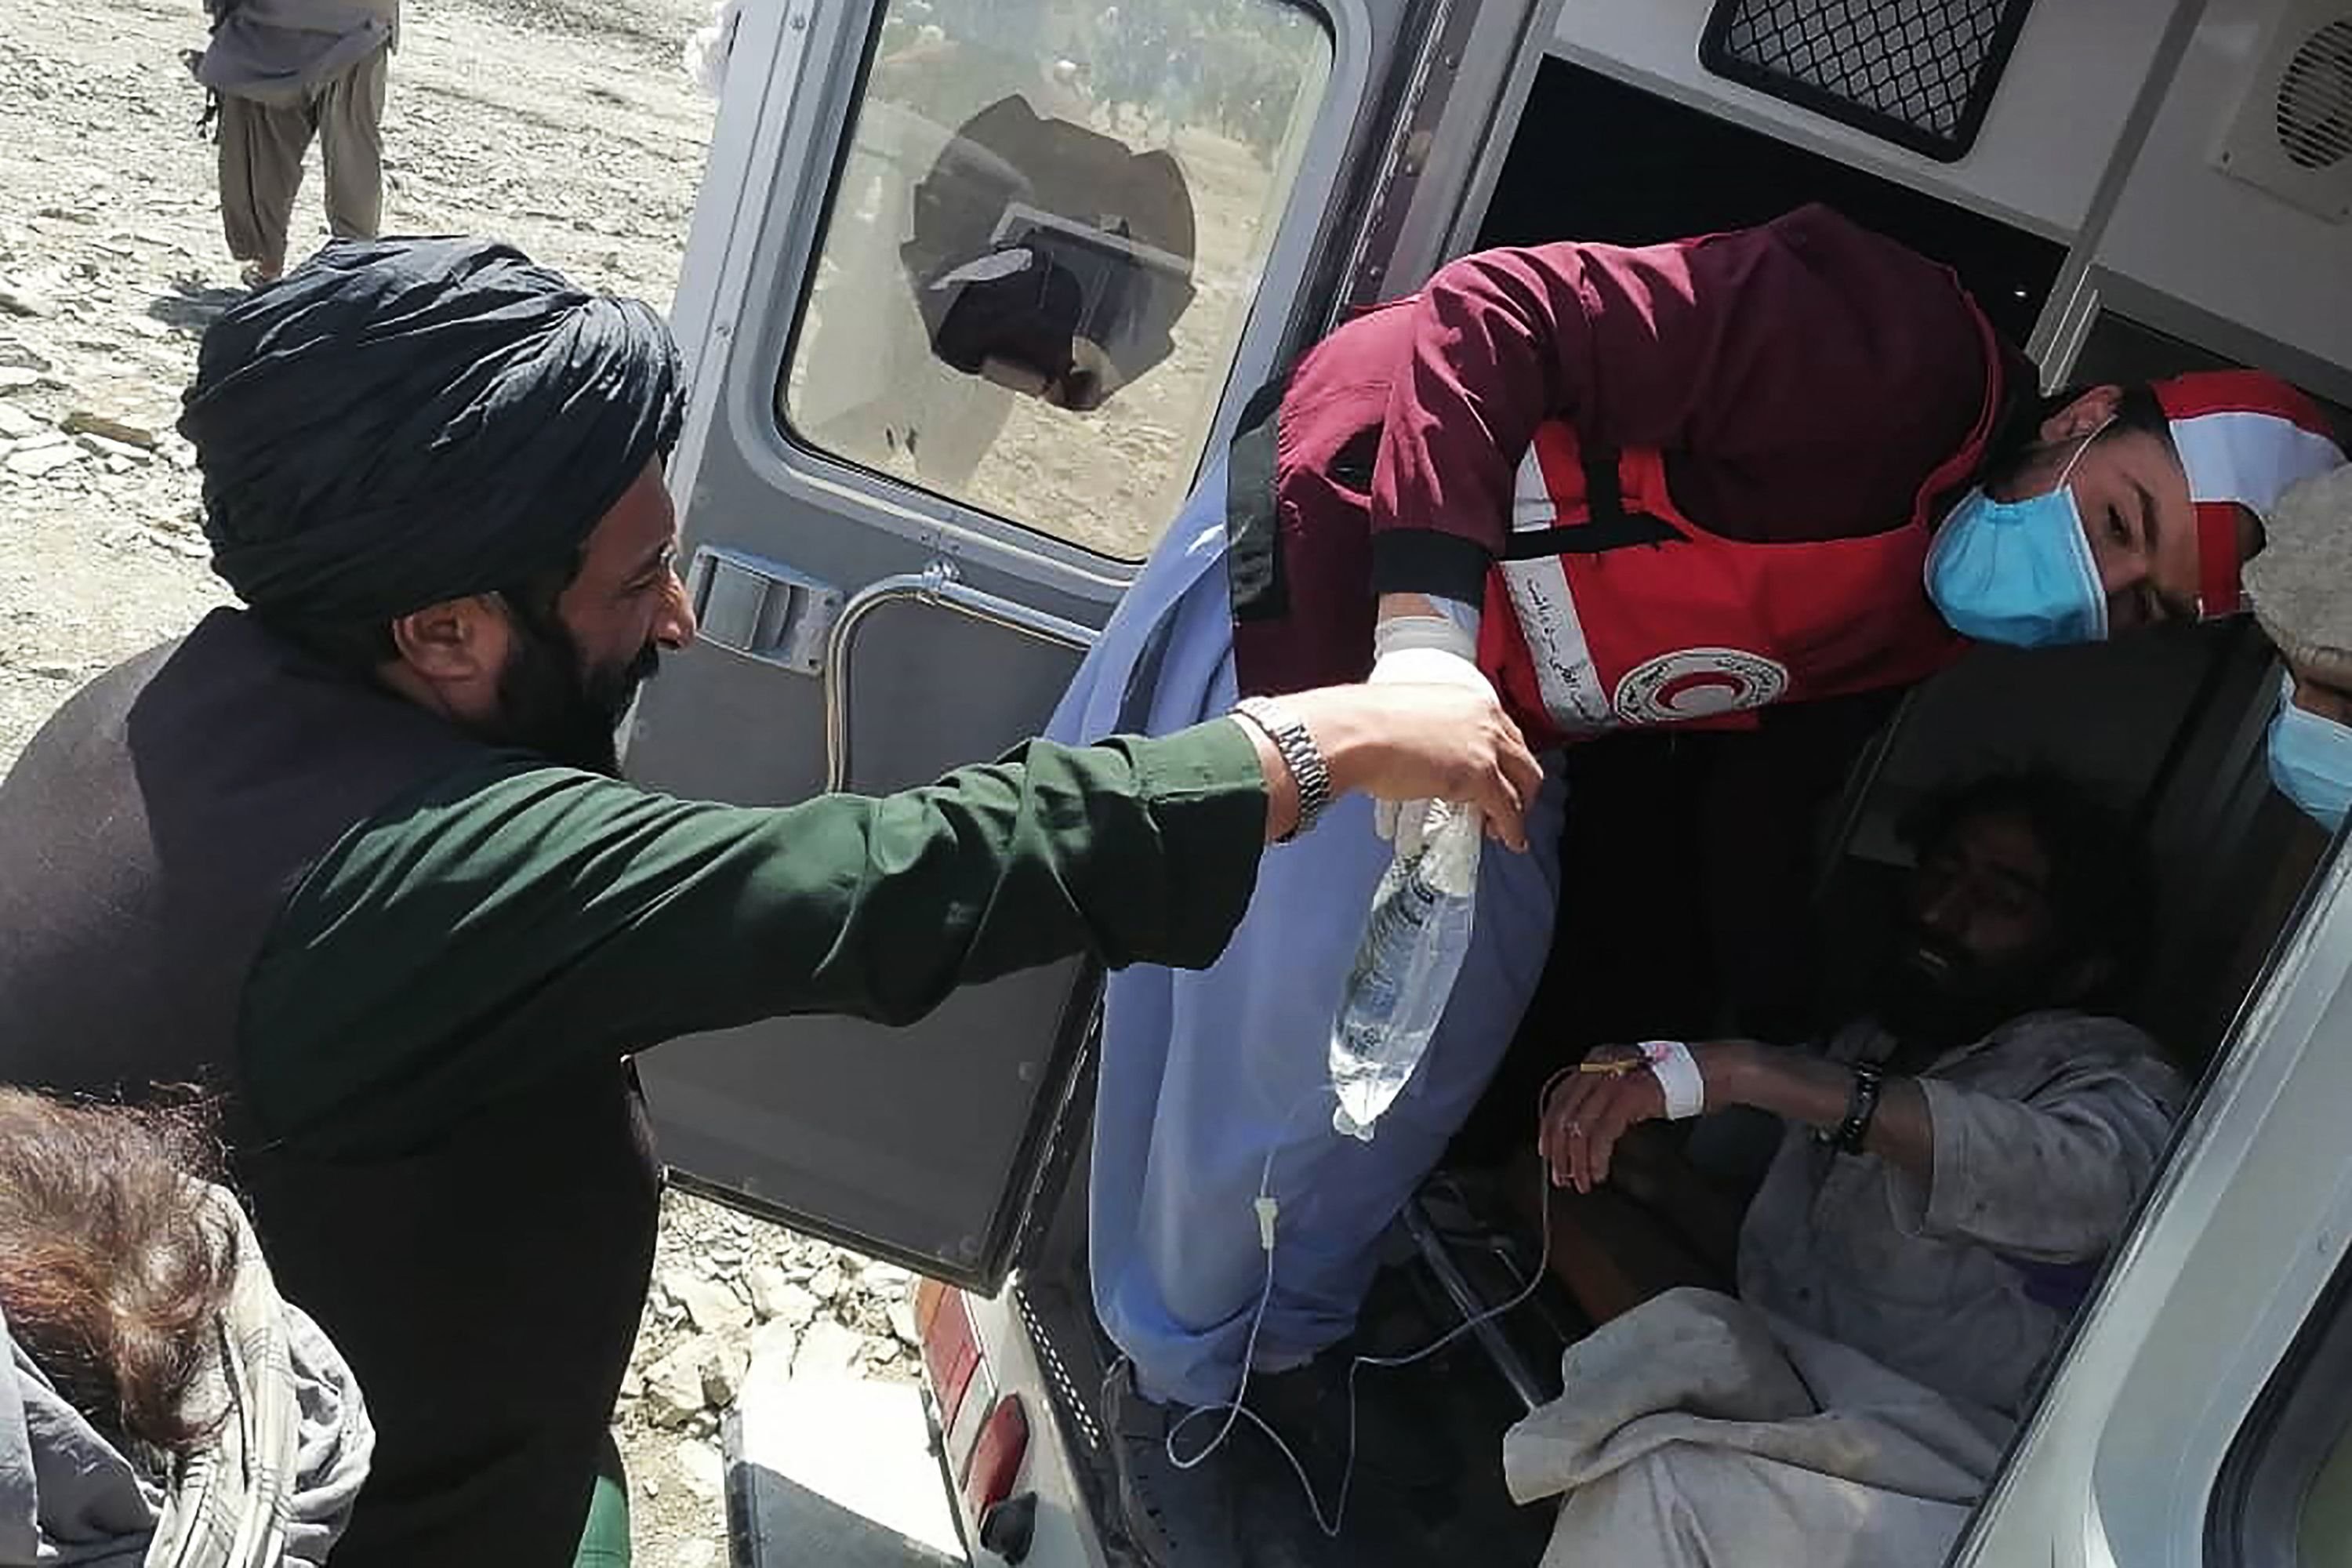 In this photo released by the state-run Bakhtar News Agency, a member of the Afghan Red Crescent Society provides medical treatment to a victim following an earthquake in the Gayan district, Paktika, eastern Afghanistan, June 22, 2022. (AFP Photo)